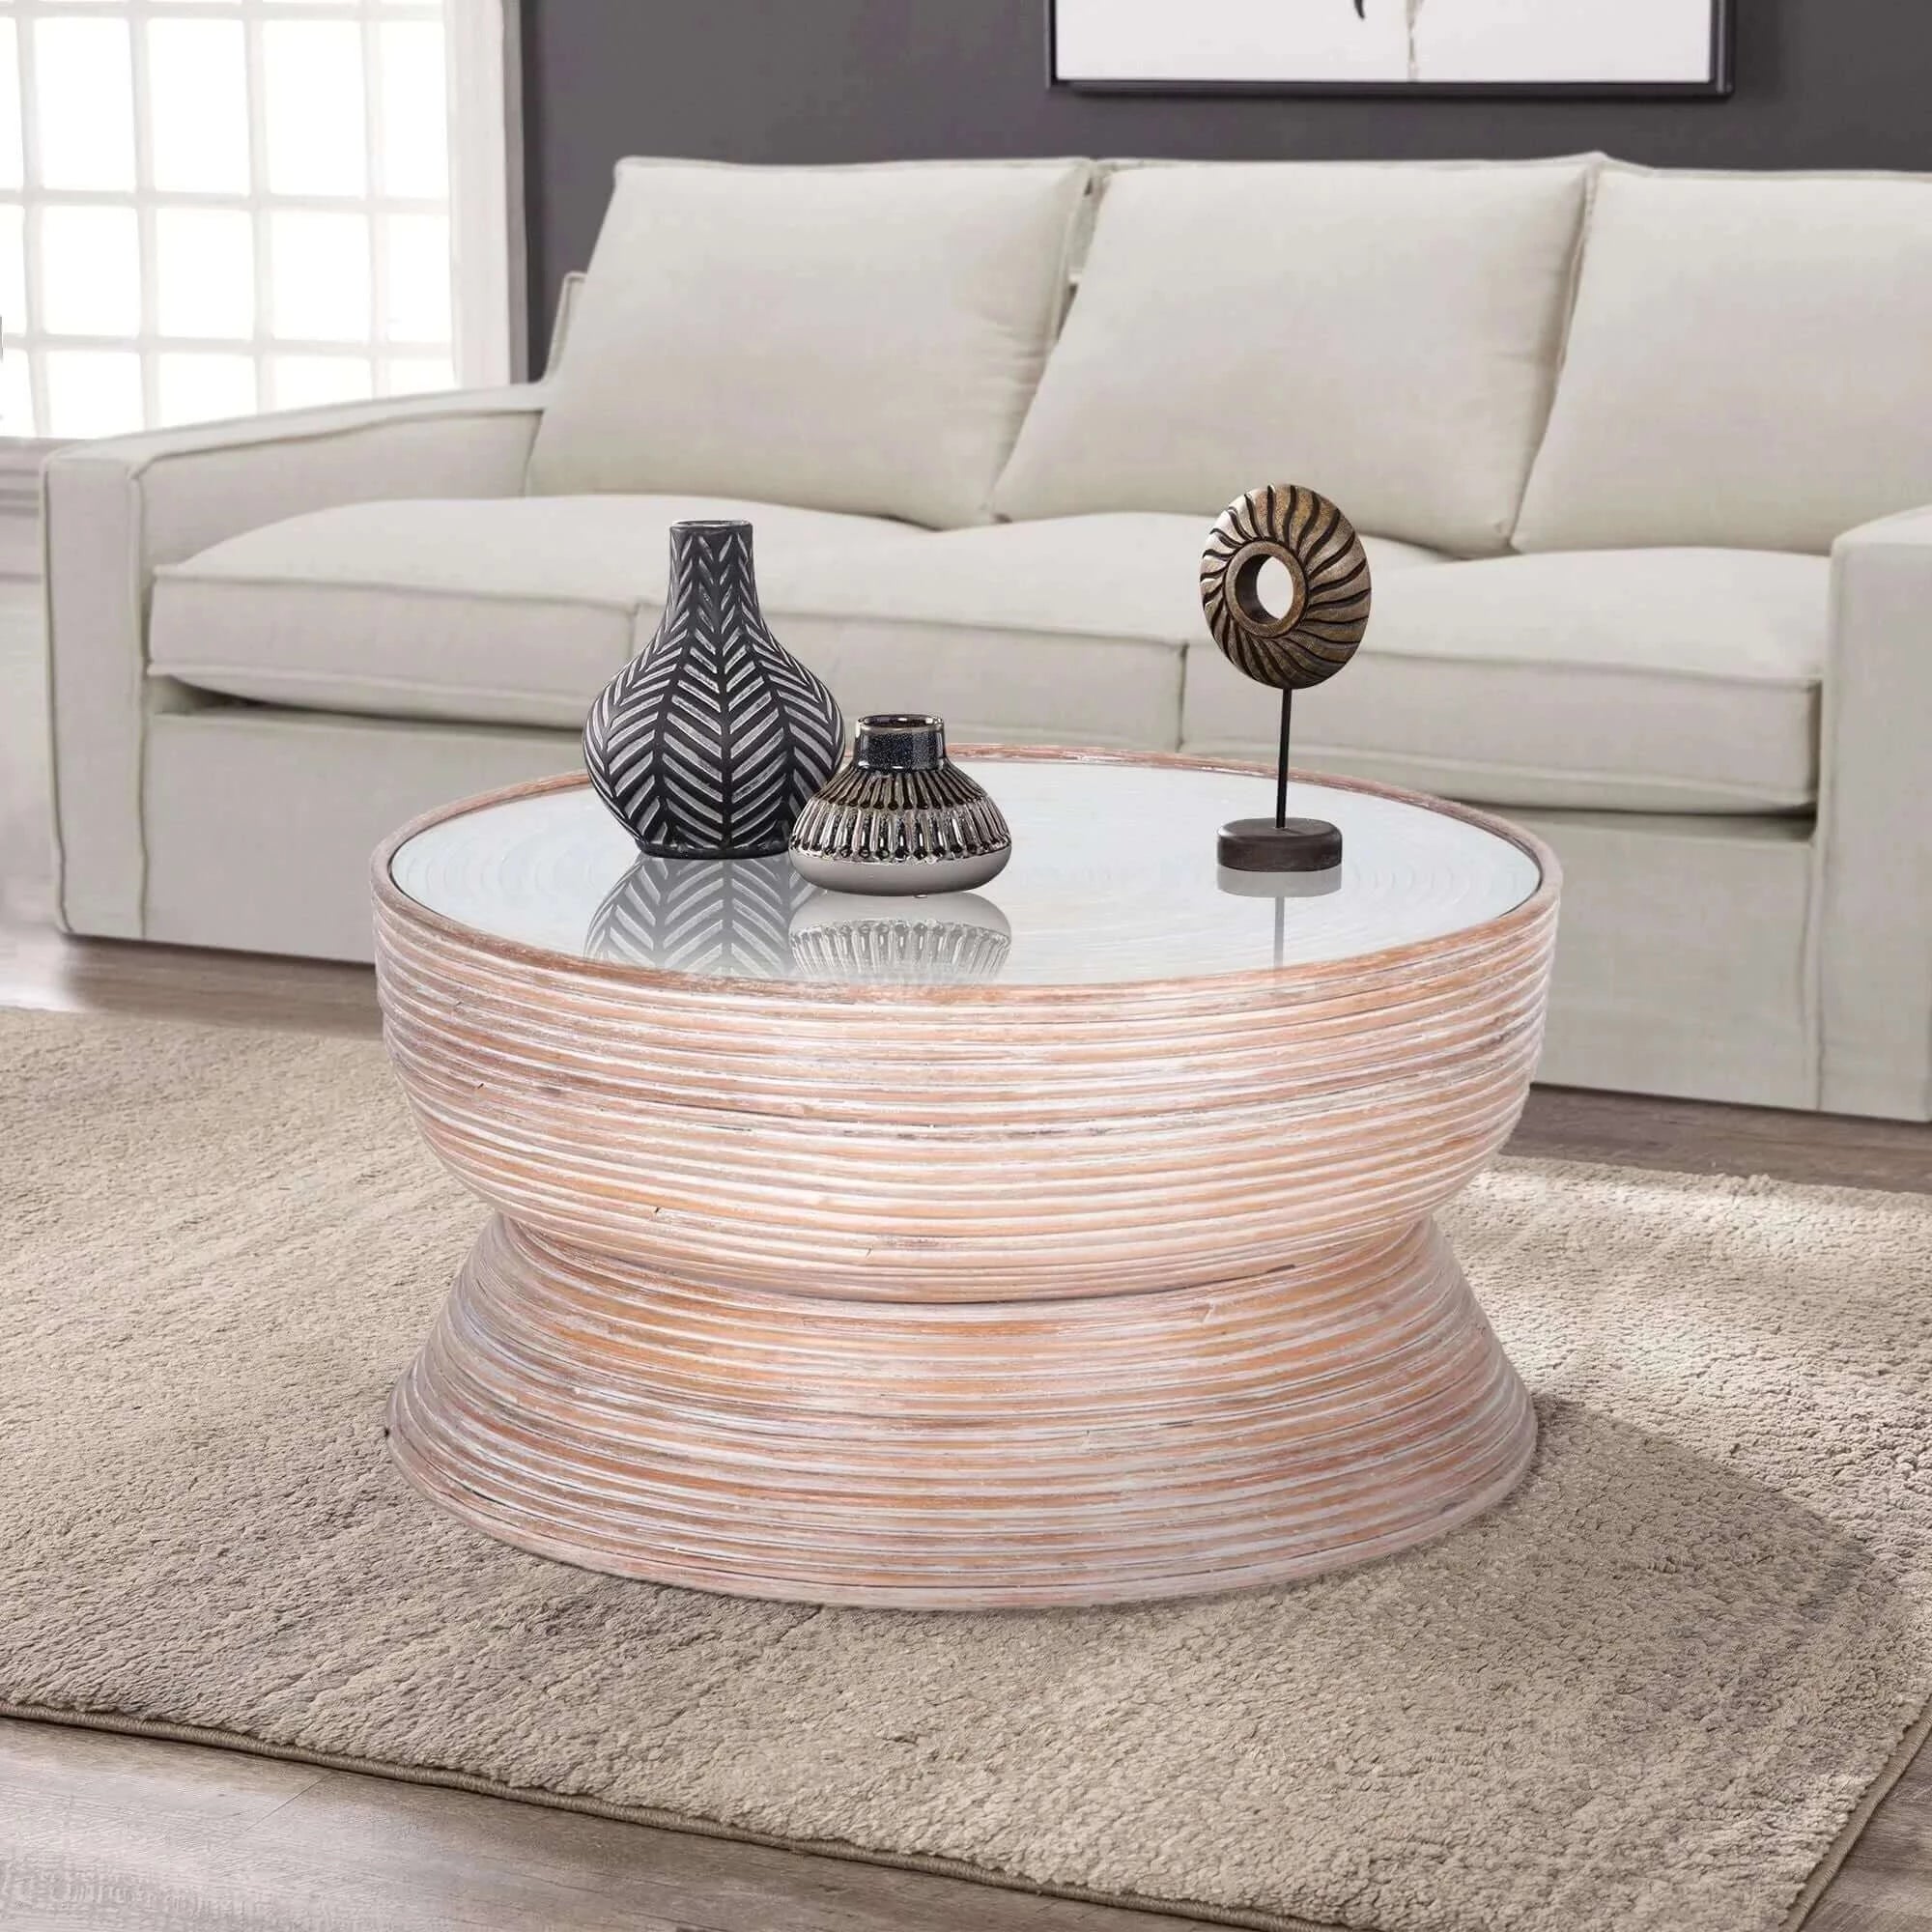 Clover Rattan Round Coffee Table 80cm with Glass Top - Whitewash-Upinteriors